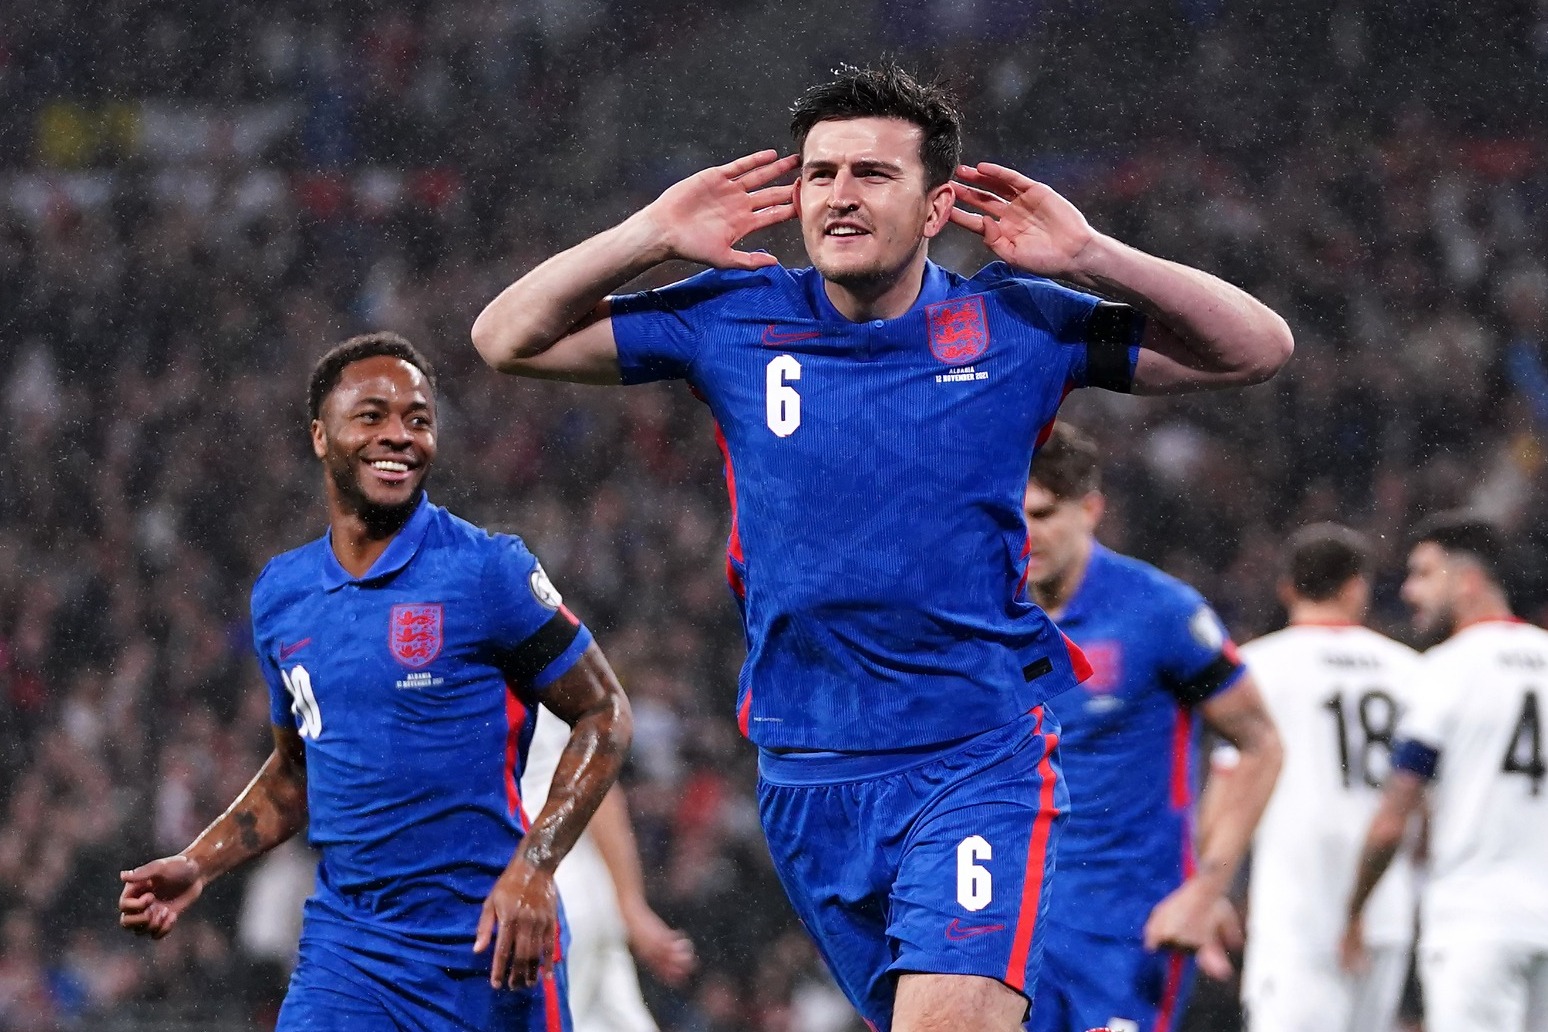 Man Utd boss Ole Gunnar Solskjaer expects Harry Maguire to prove critics wrong 